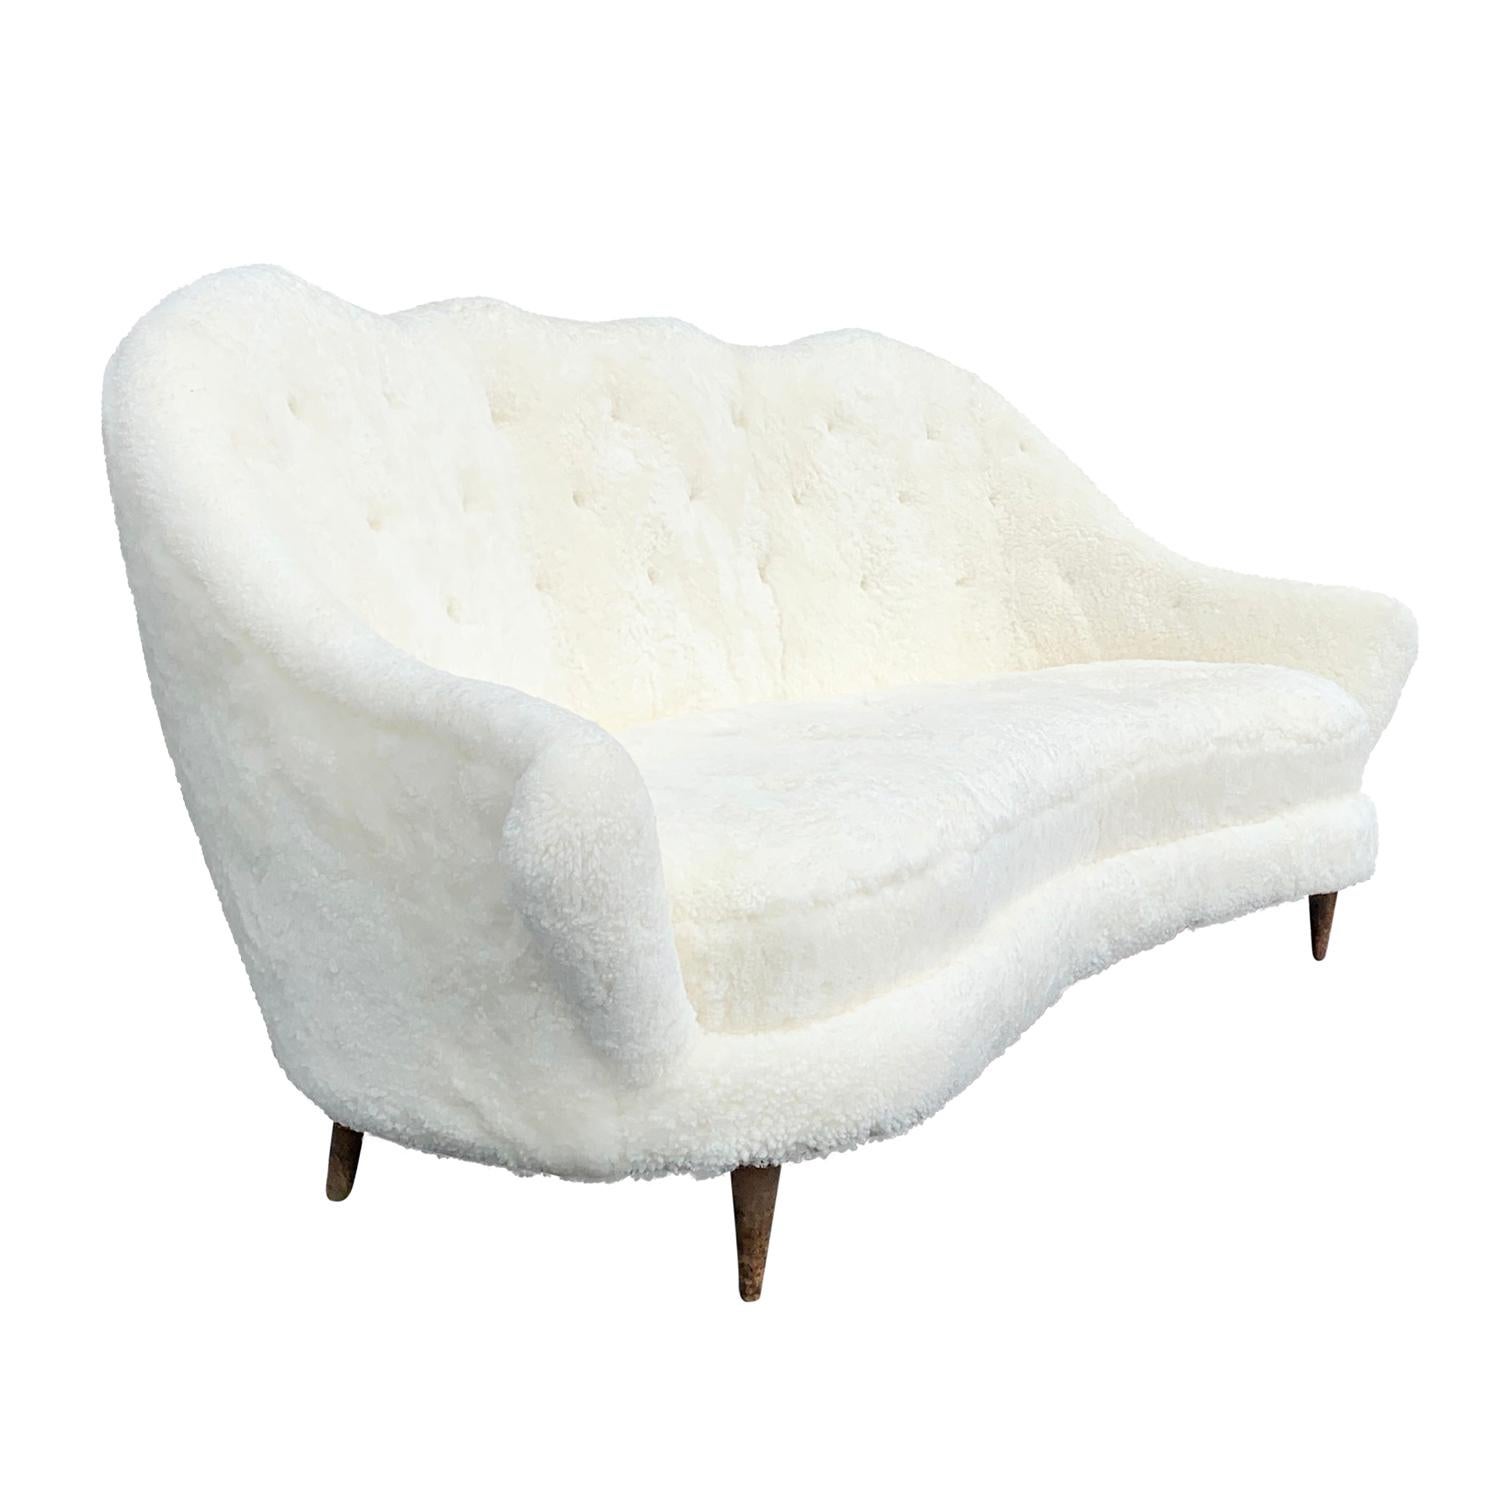 A vintage half-rounded Mid-Century Modern Italian three-seat sofa or divano made of Beechwood. Designed by Paolo Buffa in good condition. Newly upholstered in white natural sheepskin. The seat backrest has slight curves with gently outstretched